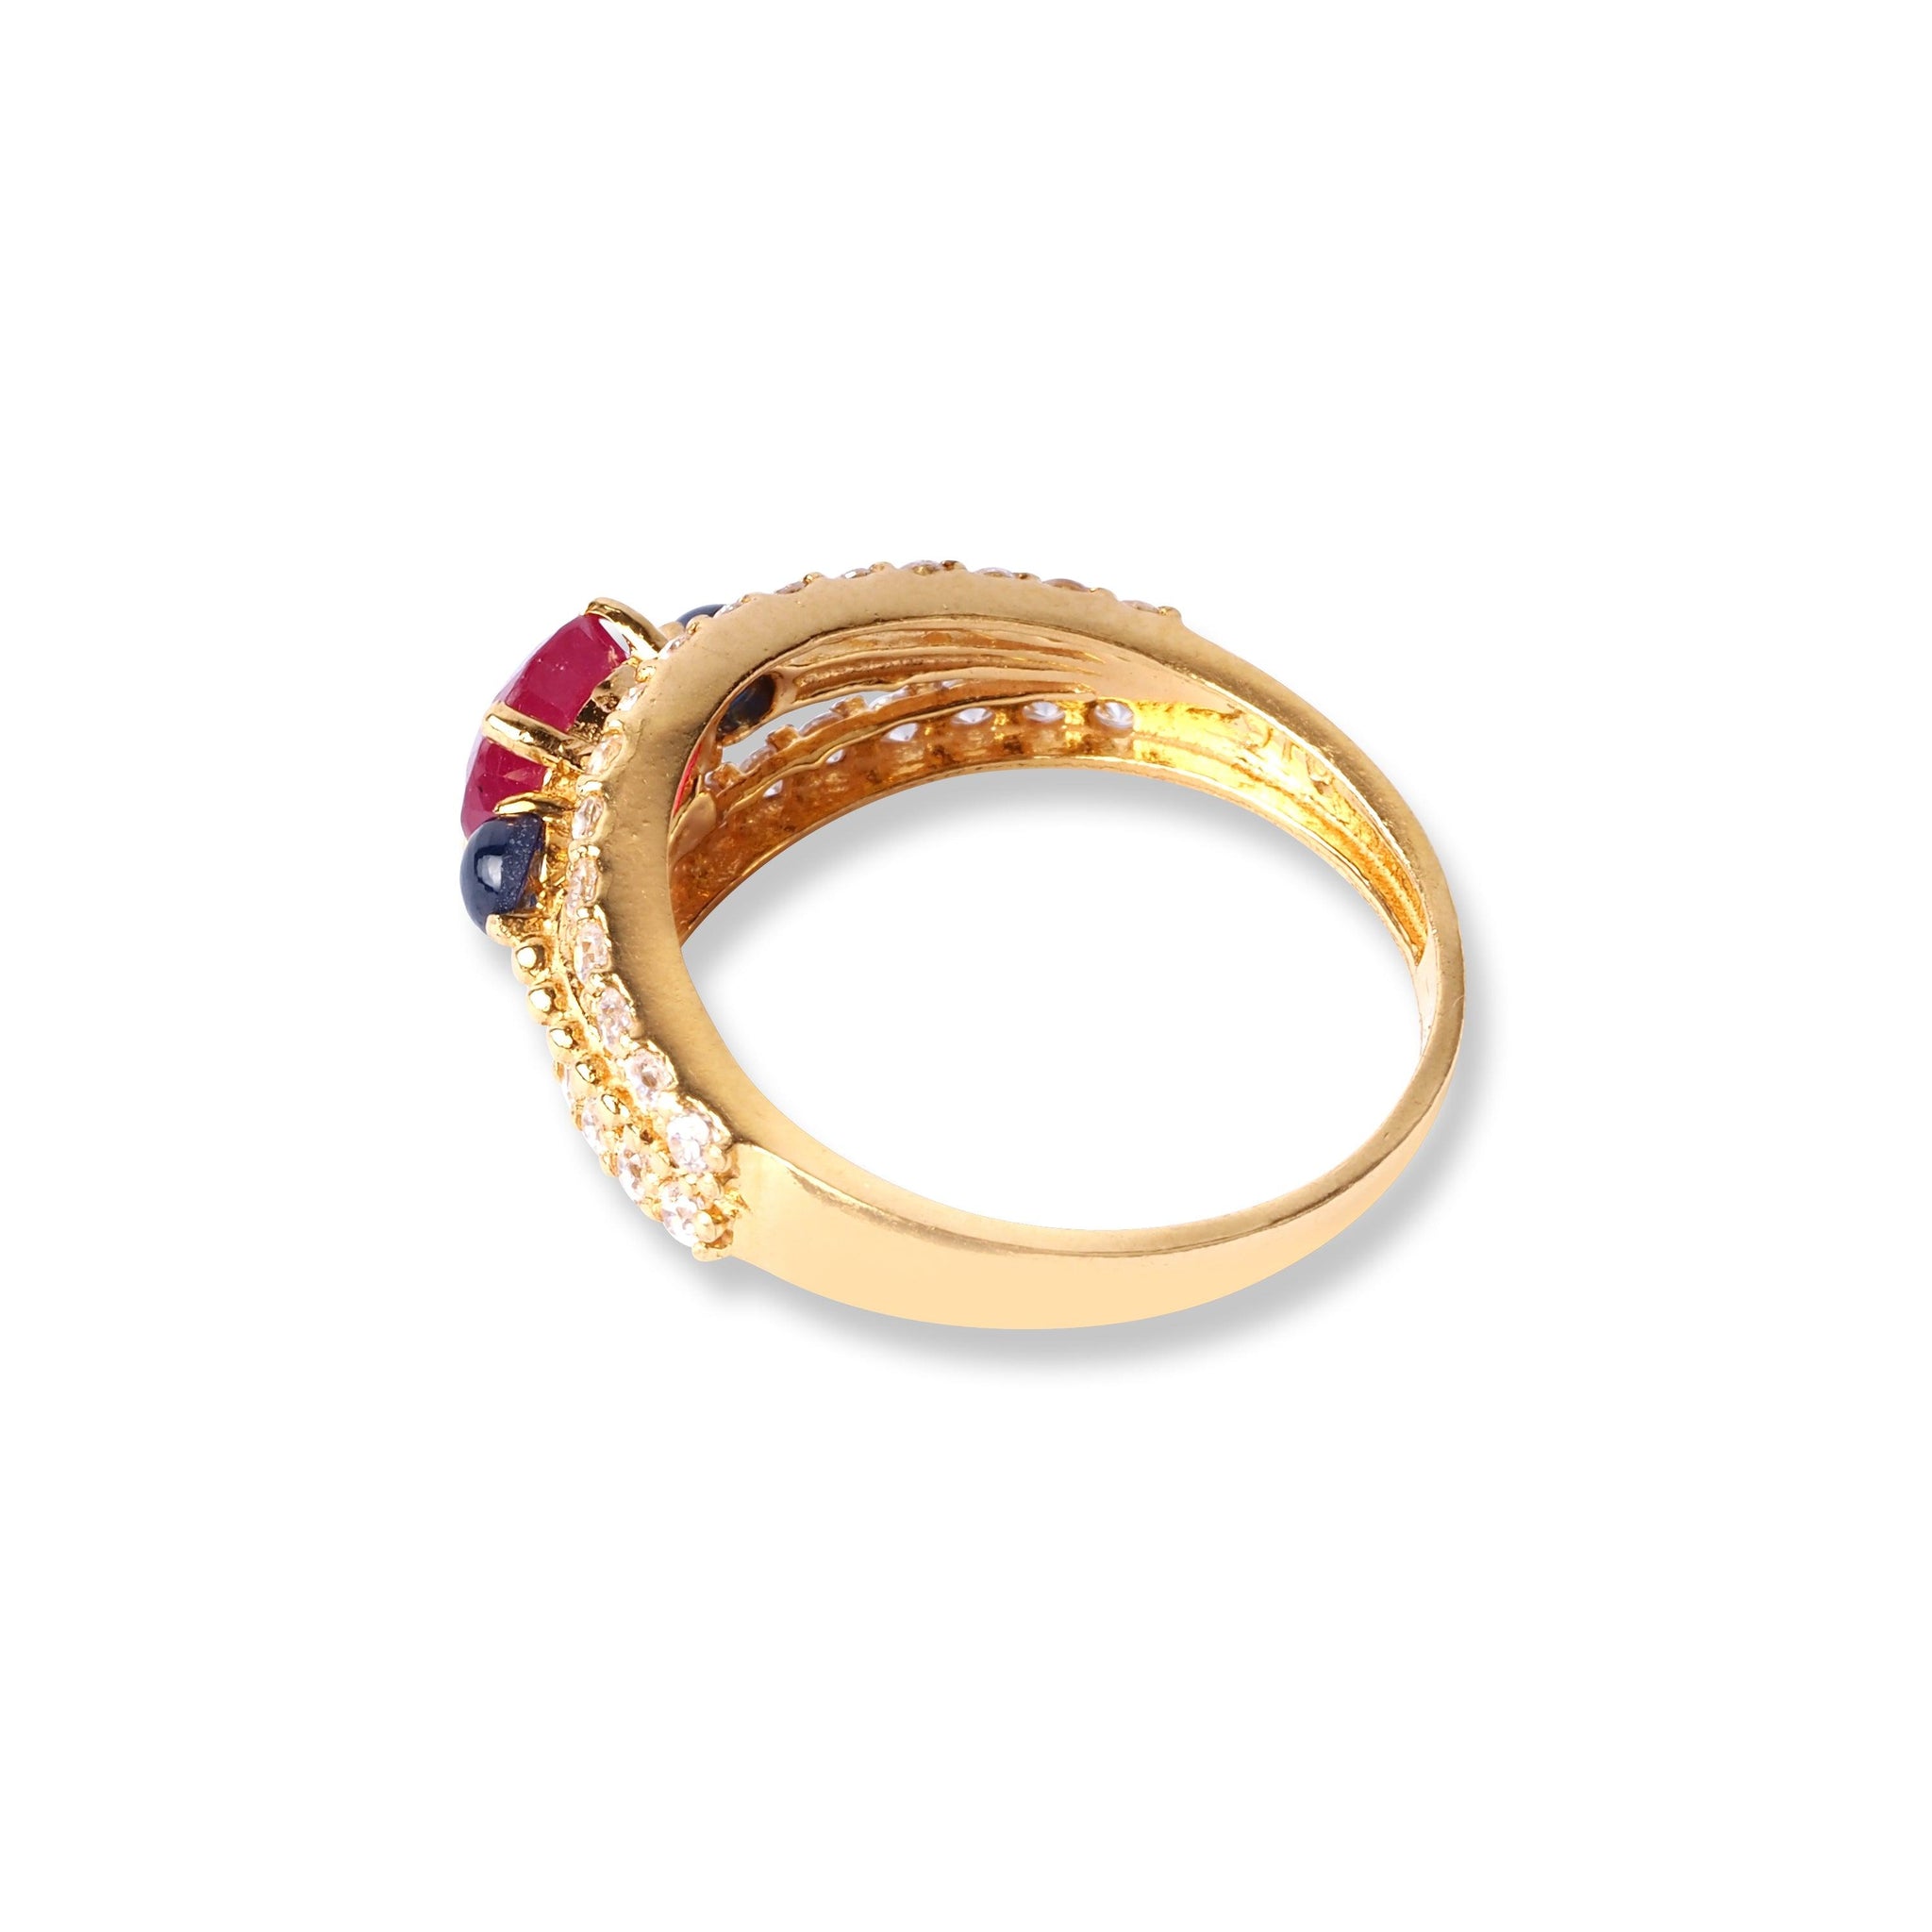 22ct Yellow Gold Ring with Pink, Navy & White Cubic Zirconia Stones (3.9g) LR-16585